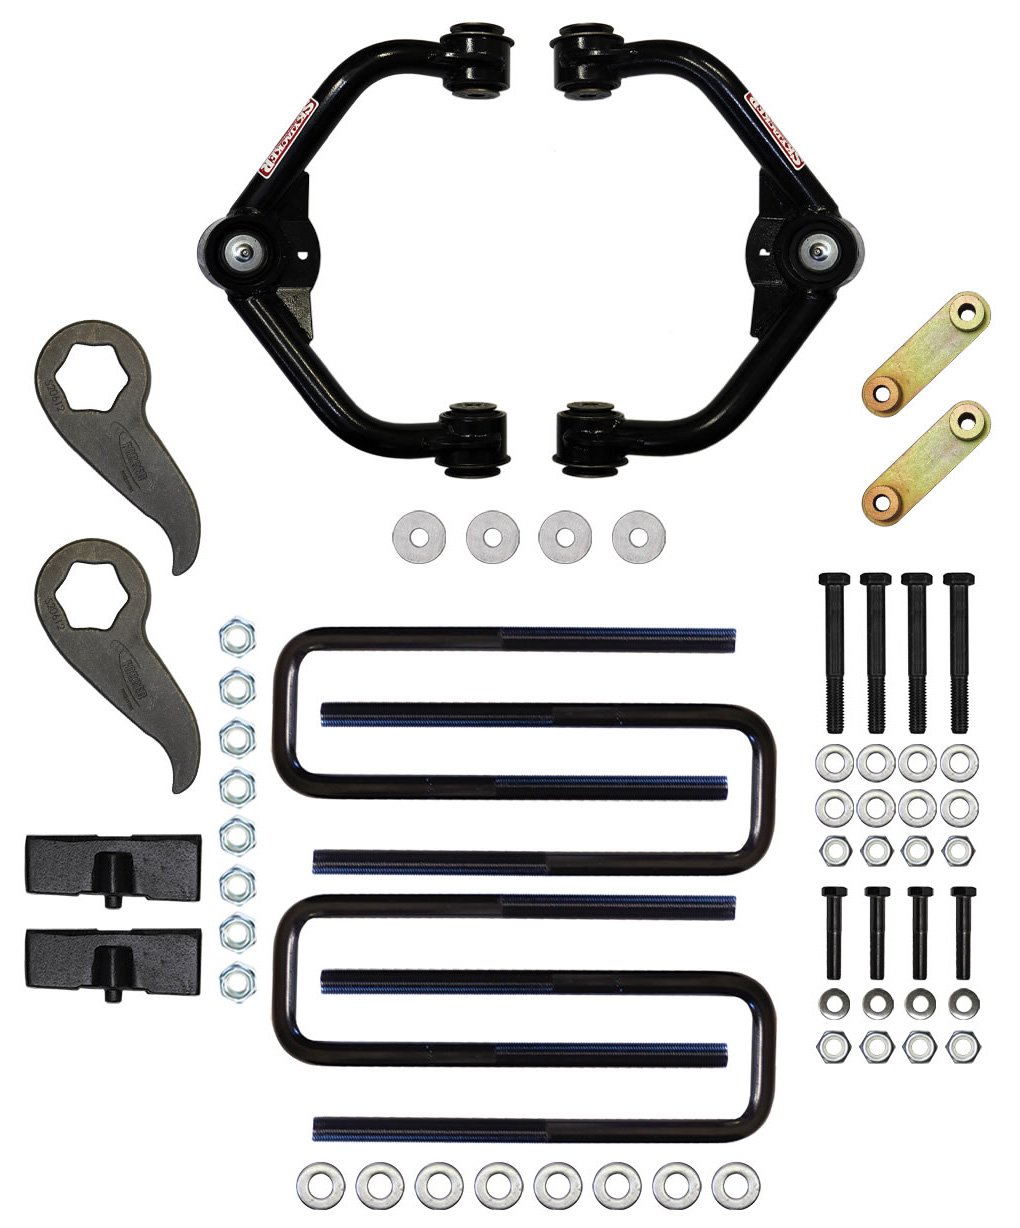 3.0-3.5 in. Lift Kit Component Box for Select